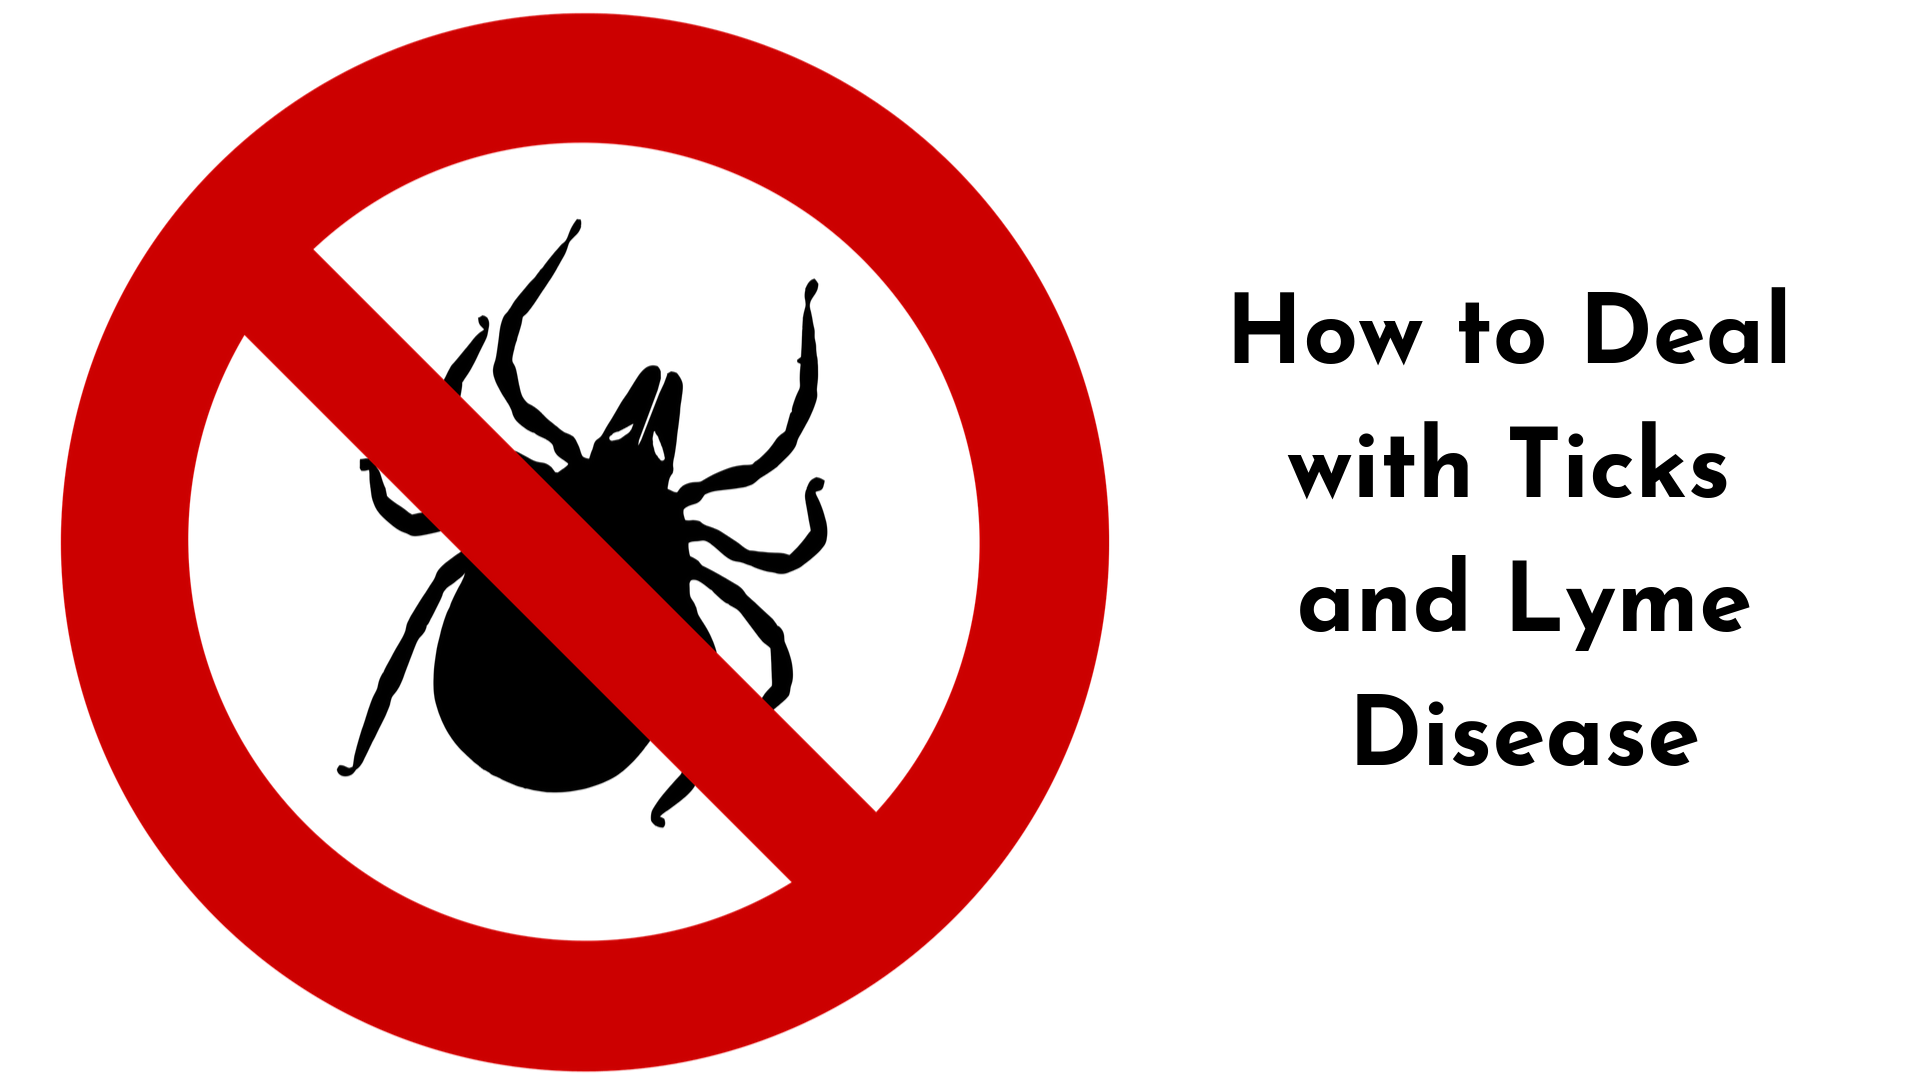 How to Deal with Ticks and Lyme Disease